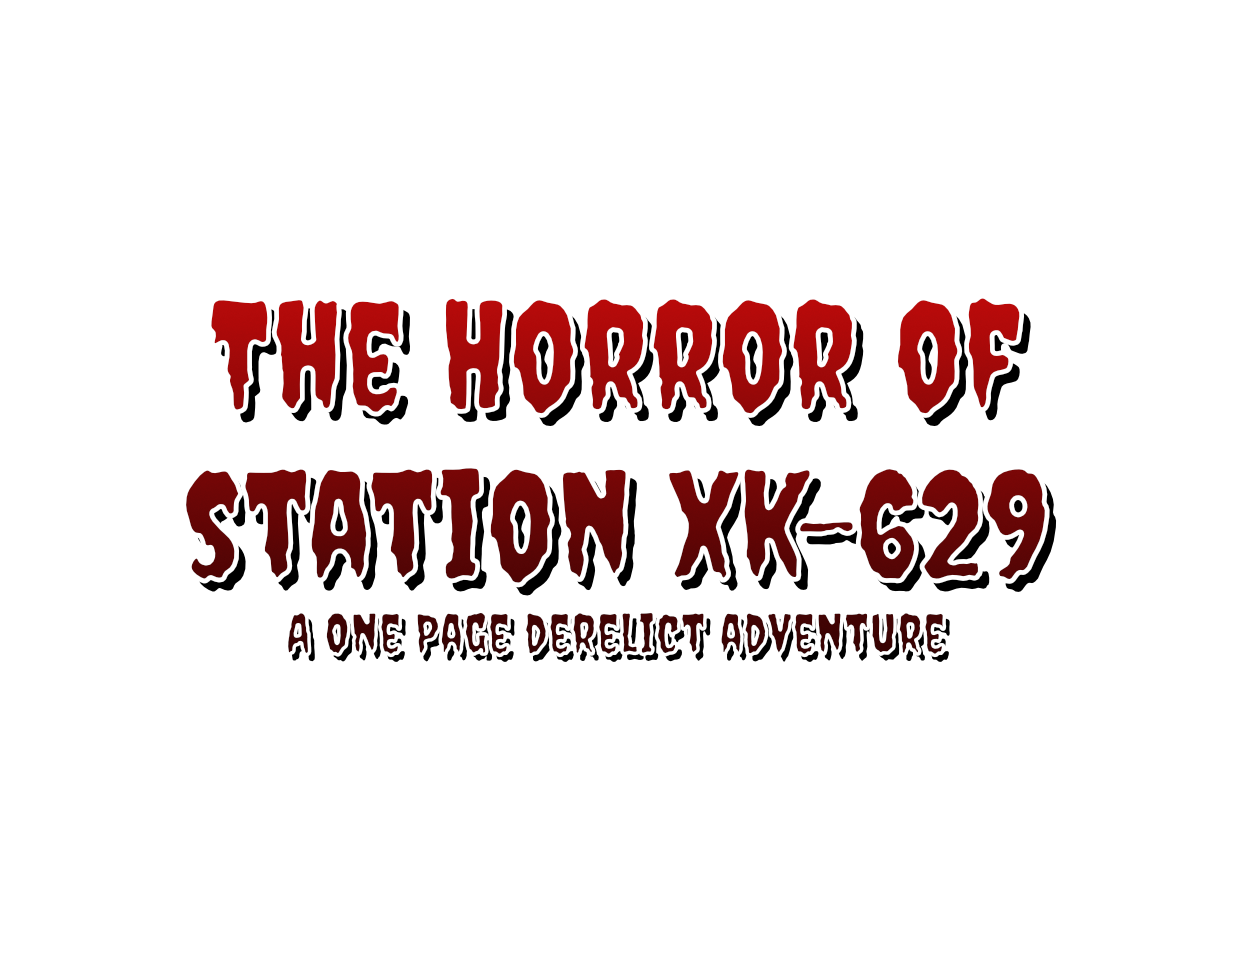 The Horror of Station XK-629